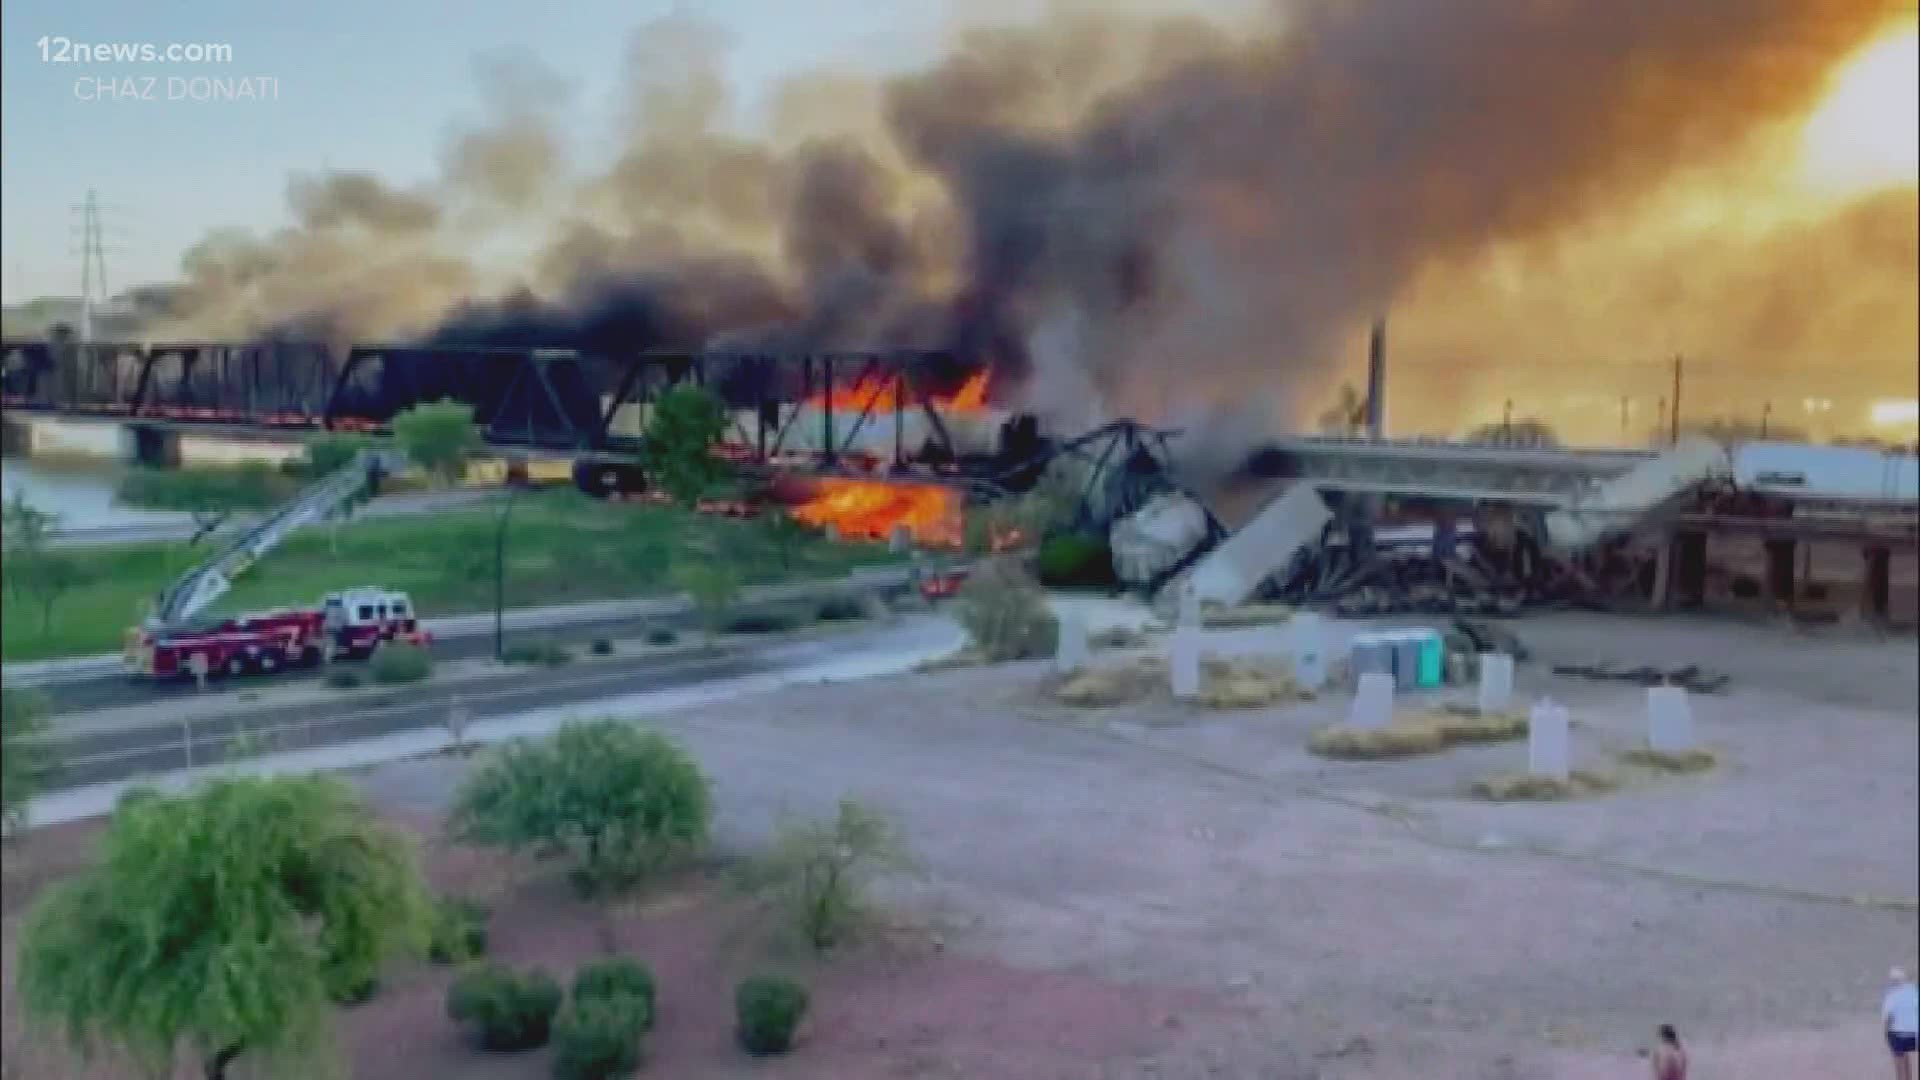 Because of the magnitude of the train derailment and fire, clean up efforts will be underway for days or weeks. The FBI has been asked to help with the investigation